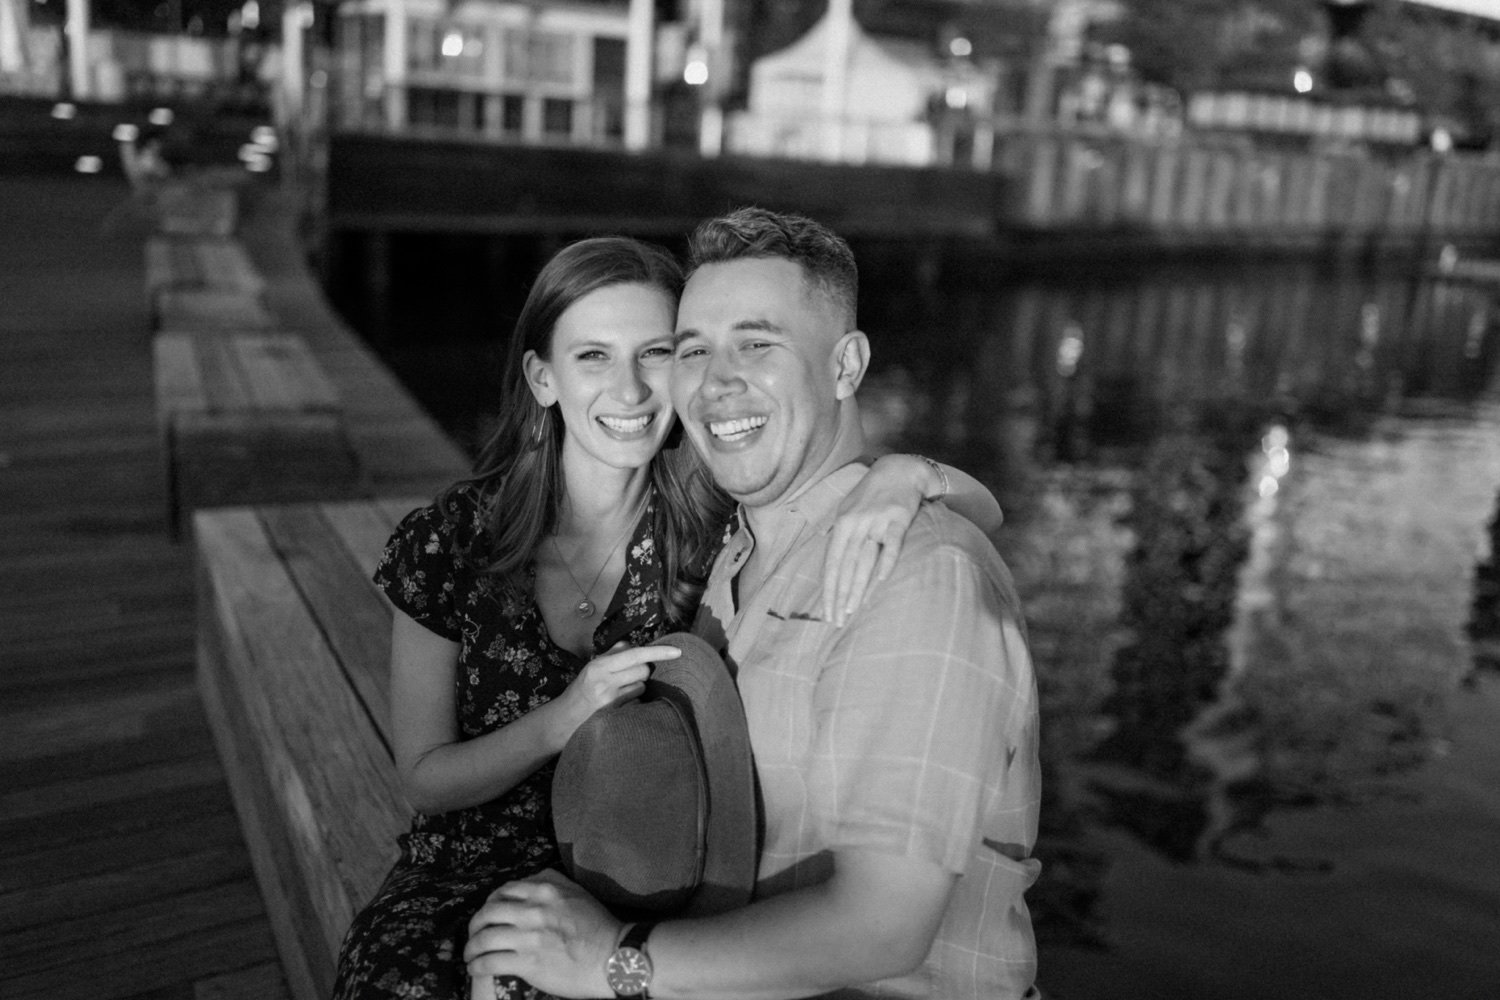 15_The Wharf Engagement Session - Fun - Fountain-122_The Wharf Engagement Session in the fountain.jpg